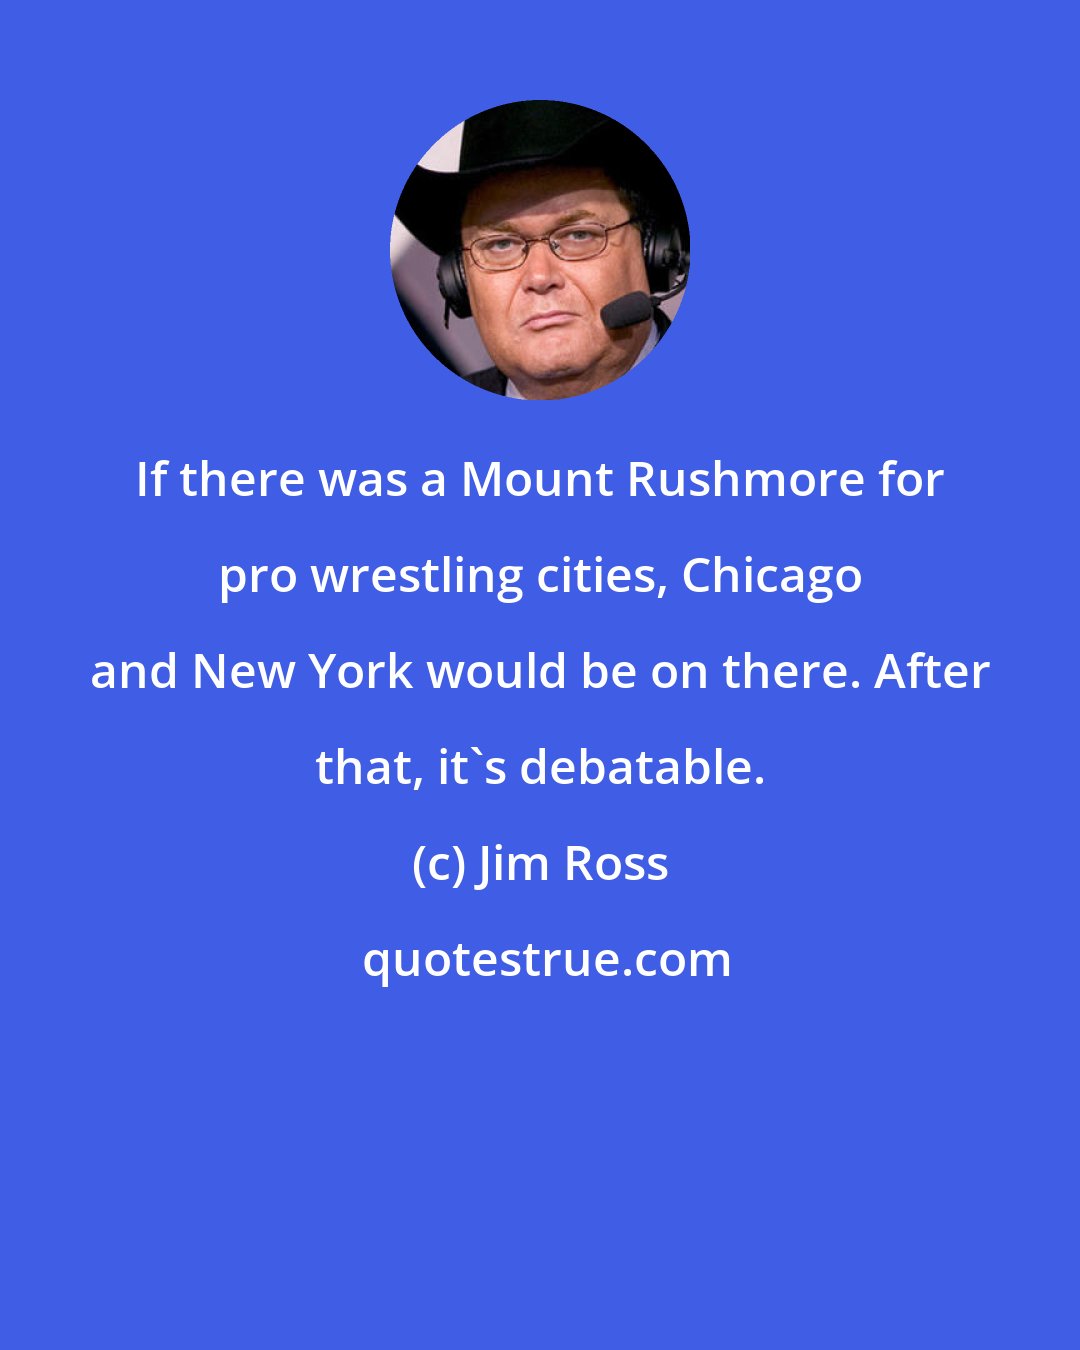 Jim Ross: If there was a Mount Rushmore for pro wrestling cities, Chicago and New York would be on there. After that, it's debatable.